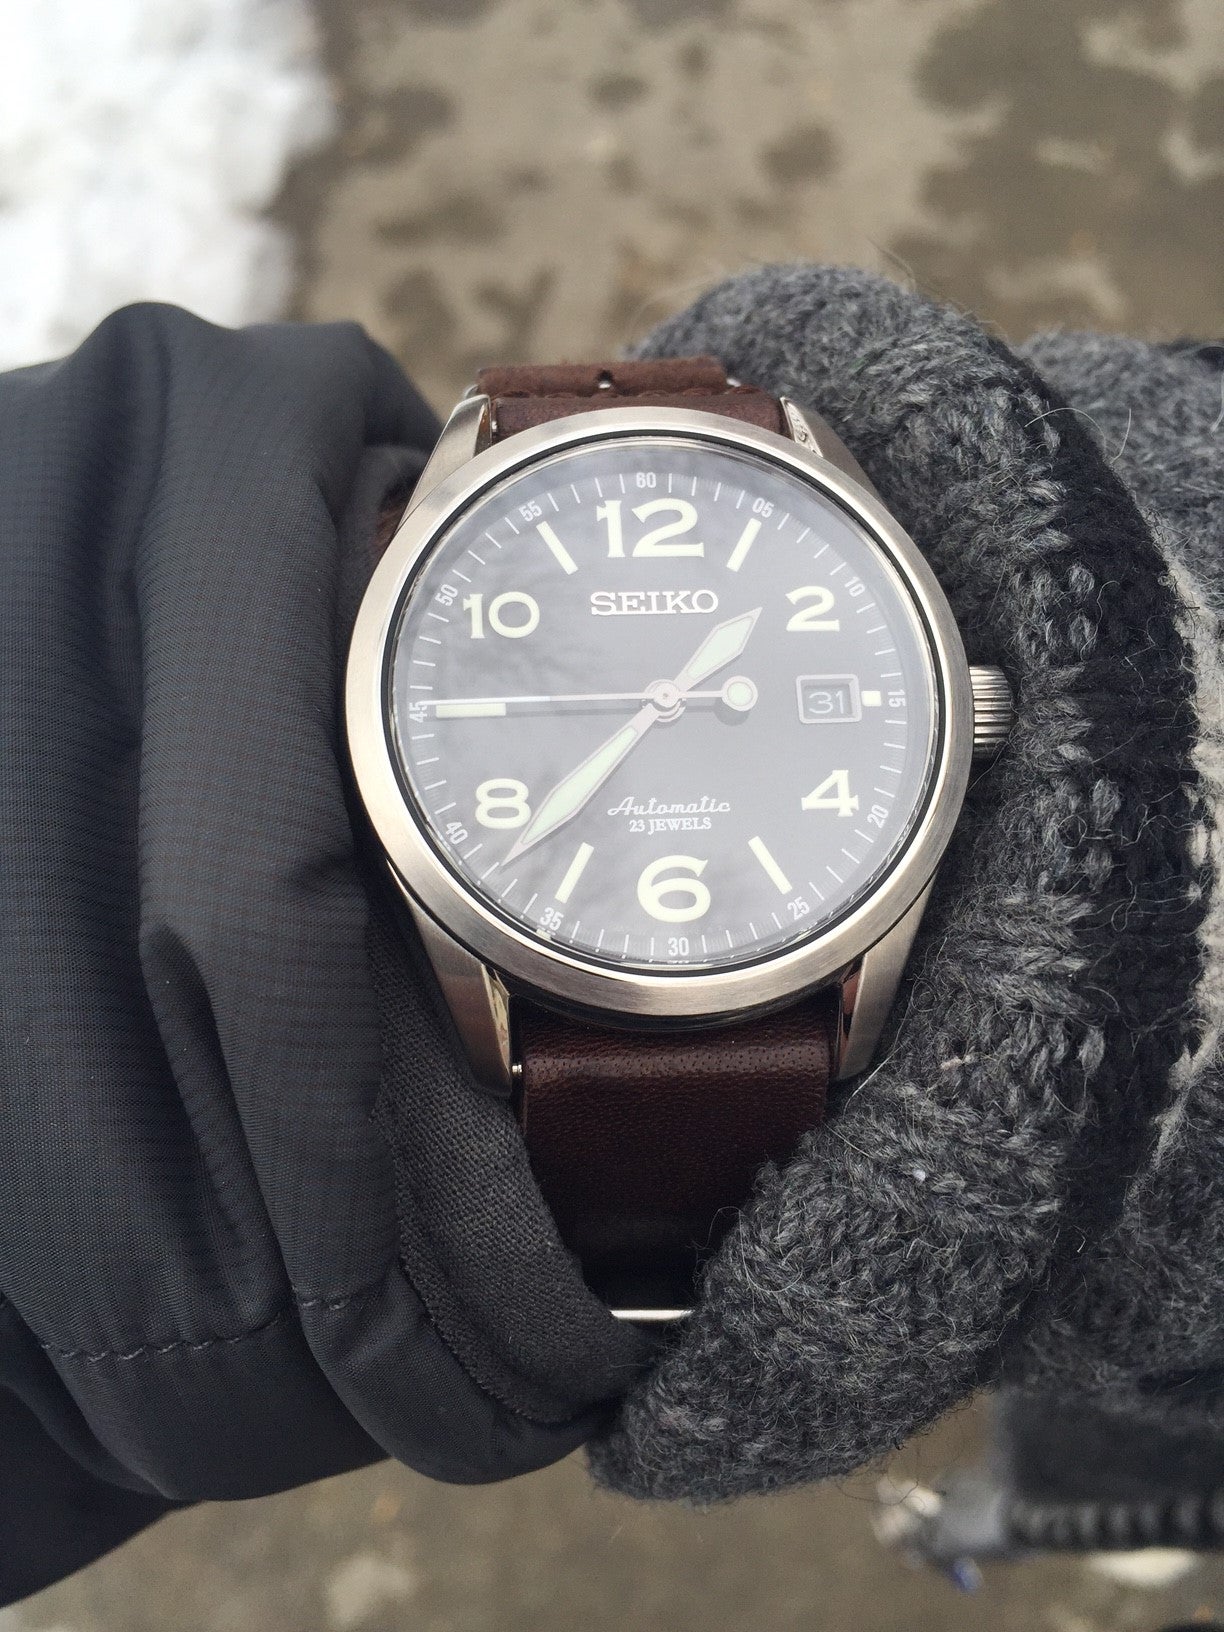 Seiko SARG009 Initial Review: The sportsman?s watch | WatchUSeek Watch  Forums